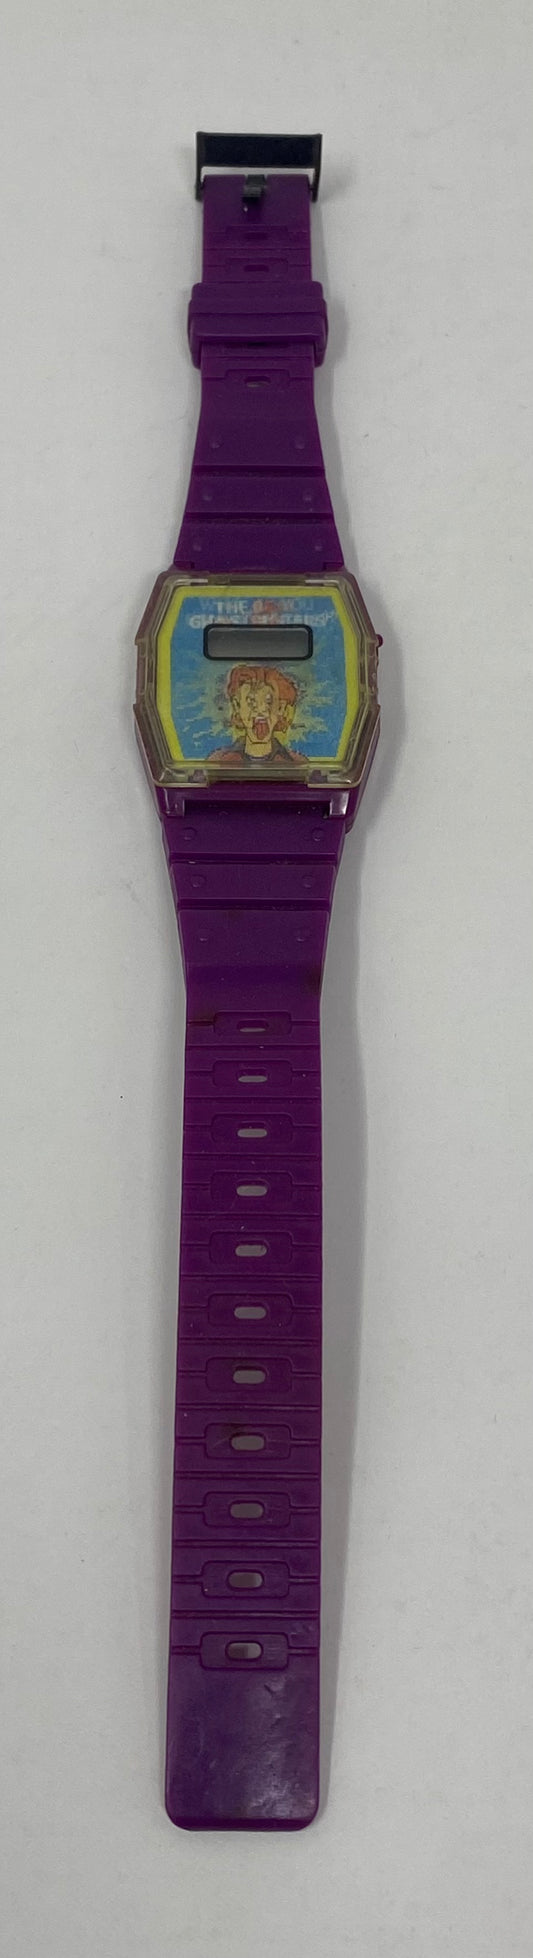 Vintage The Real Ghostbusters Haunted Hologram Watch - Rare Mail in Premium